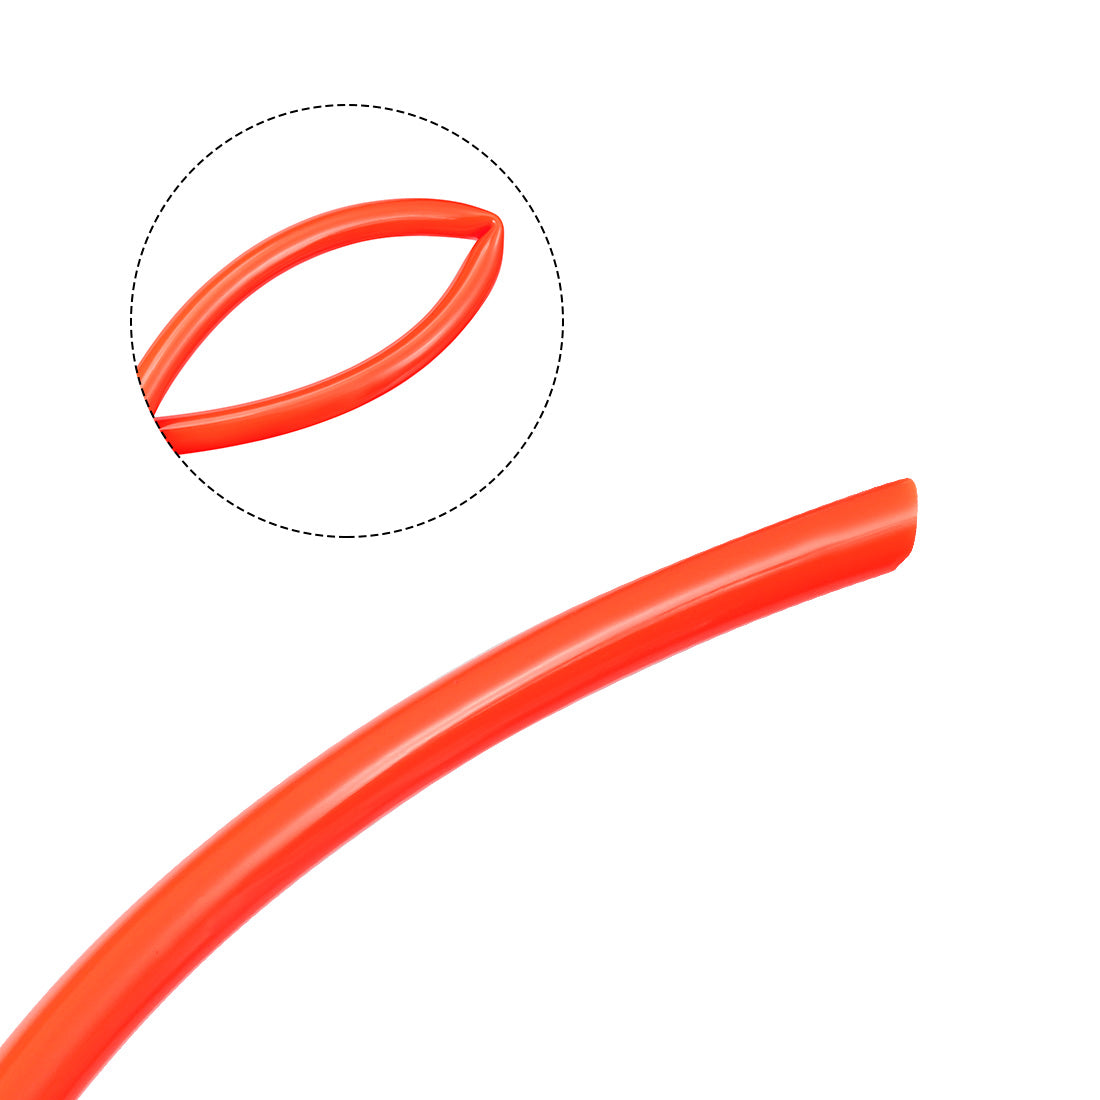 uxcell Uxcell 12mm X 8mm Pneumatic Air PU Hose Pipe Tube 5 Meter 16.4ft Orange